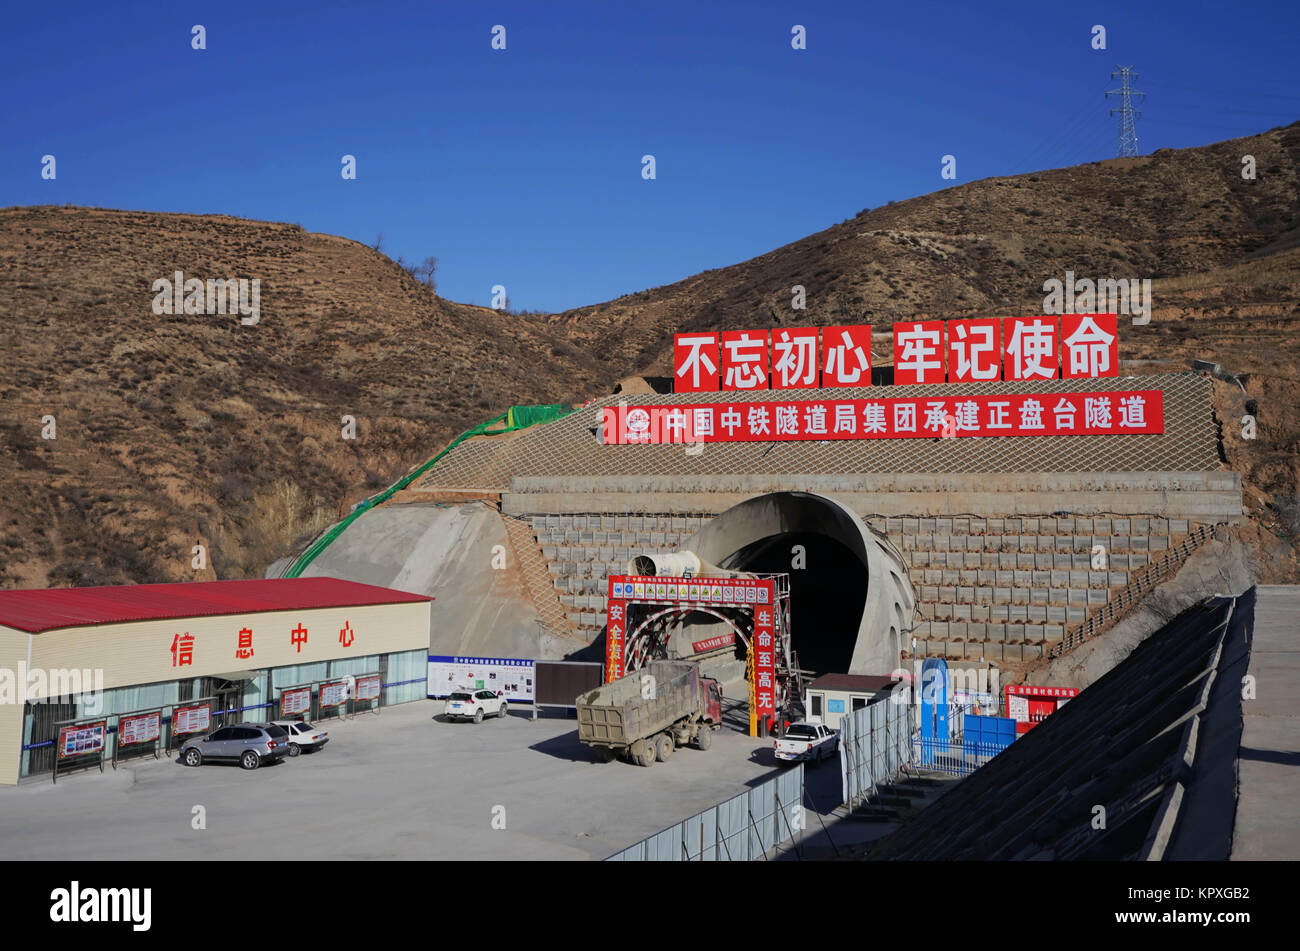 Shijiazhuang. 17th Dec, 2017. Photo taken on Dec. 17, 2017 shows the construction site of Zhengpantai tunnel of an extension line of the Beijing-Zhangjiakou high-speed railway in north China's Hebei Province. The 52-km extension of the Beijing-Zhangjiakou railway to Hebei's Chongli District, where most of the 2022 Olympic skiing events will be held, is expected to be completed by the end of 2019. Credit: Yang Shiyao/Xinhua/Alamy Live News Stock Photo